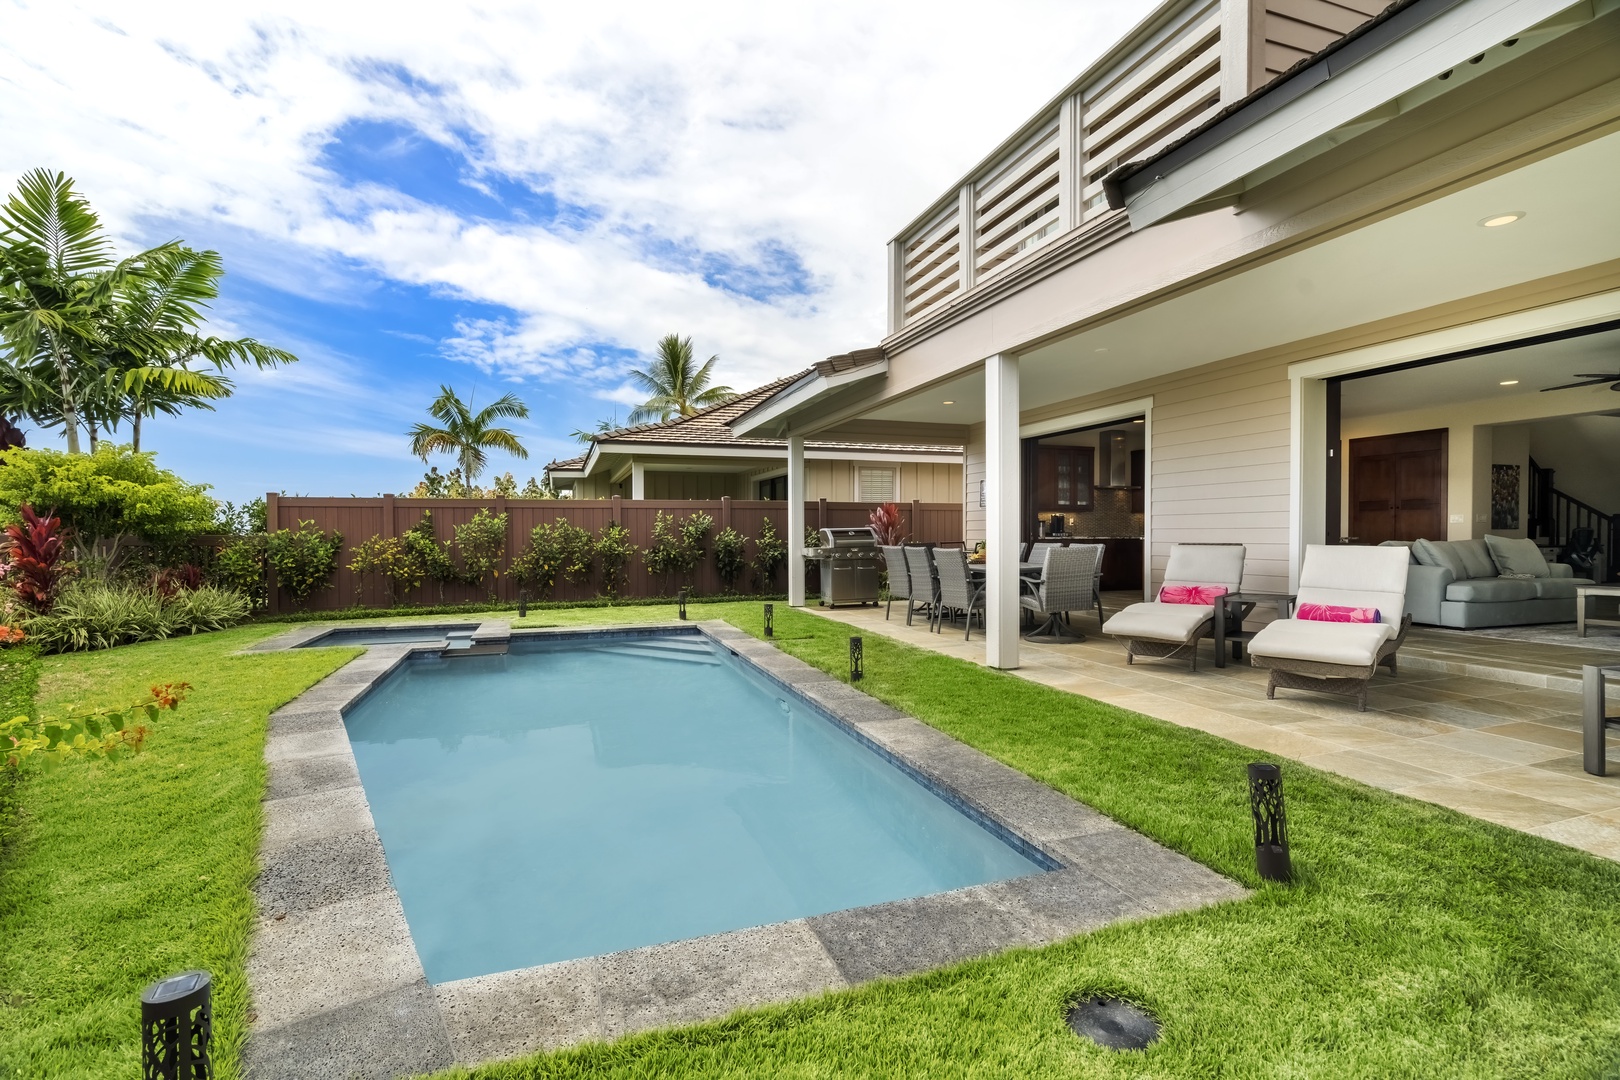 Kailua Kona Vacation Rentals, Golf Green - Saltwater pool perfect for laps or leisure